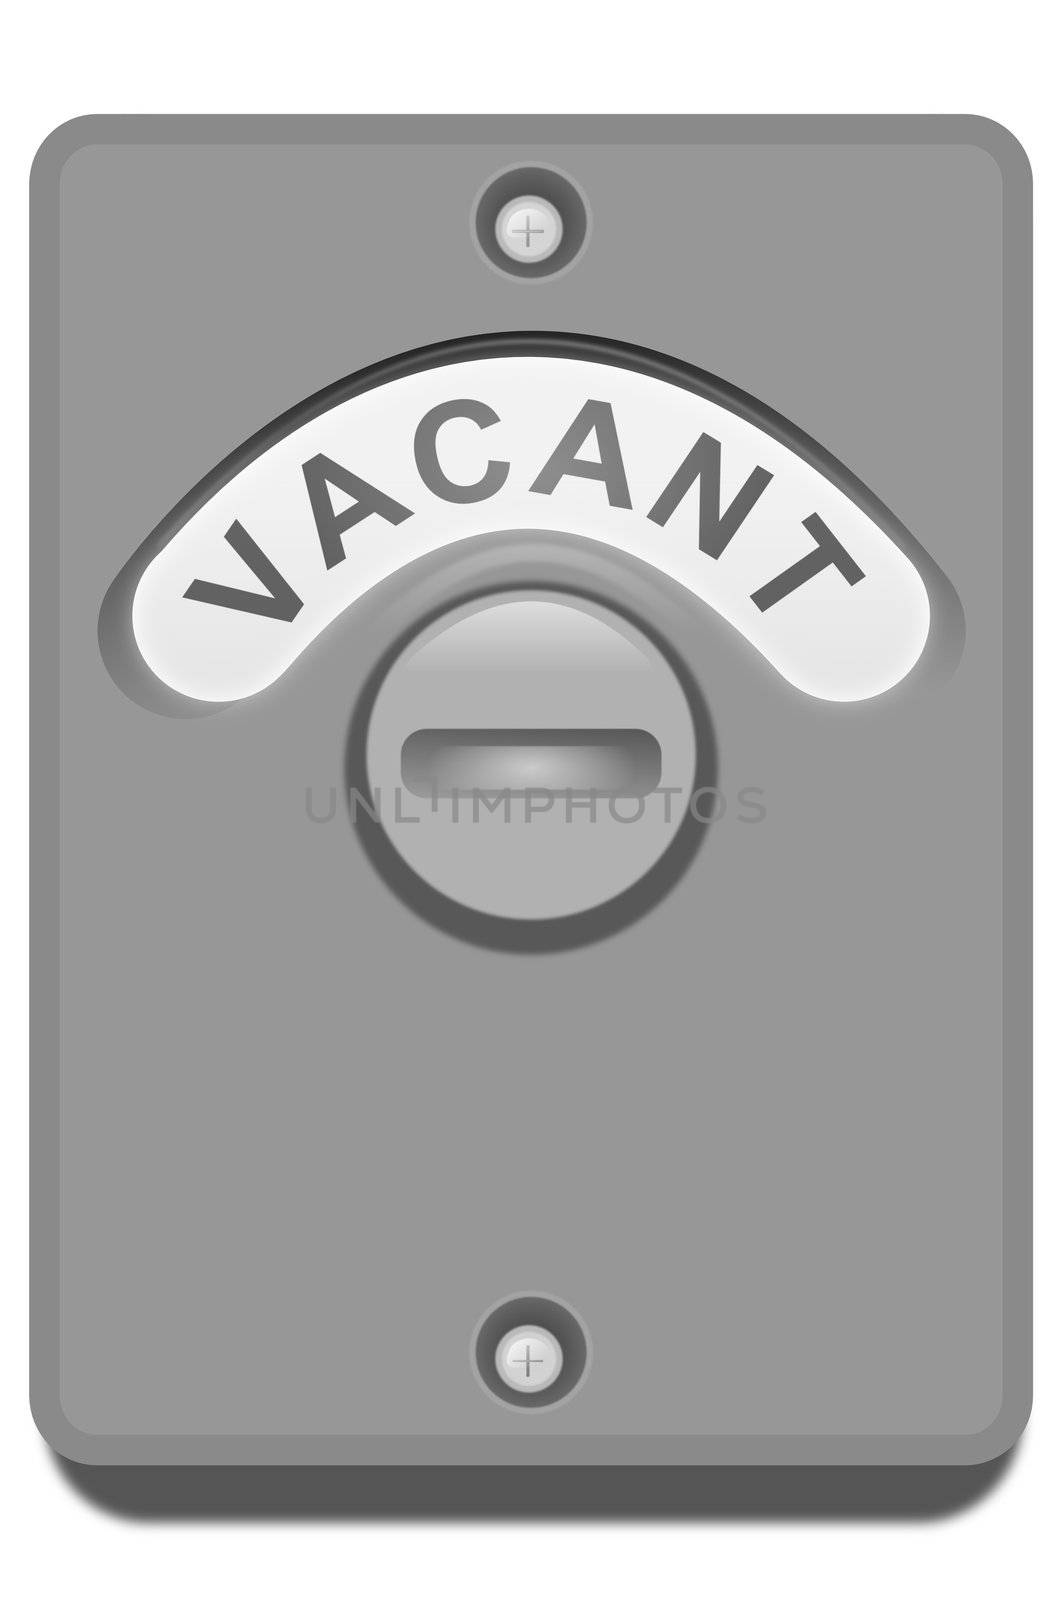 Illustration of a toilet door lock with the 'vacant' position showing. White background.